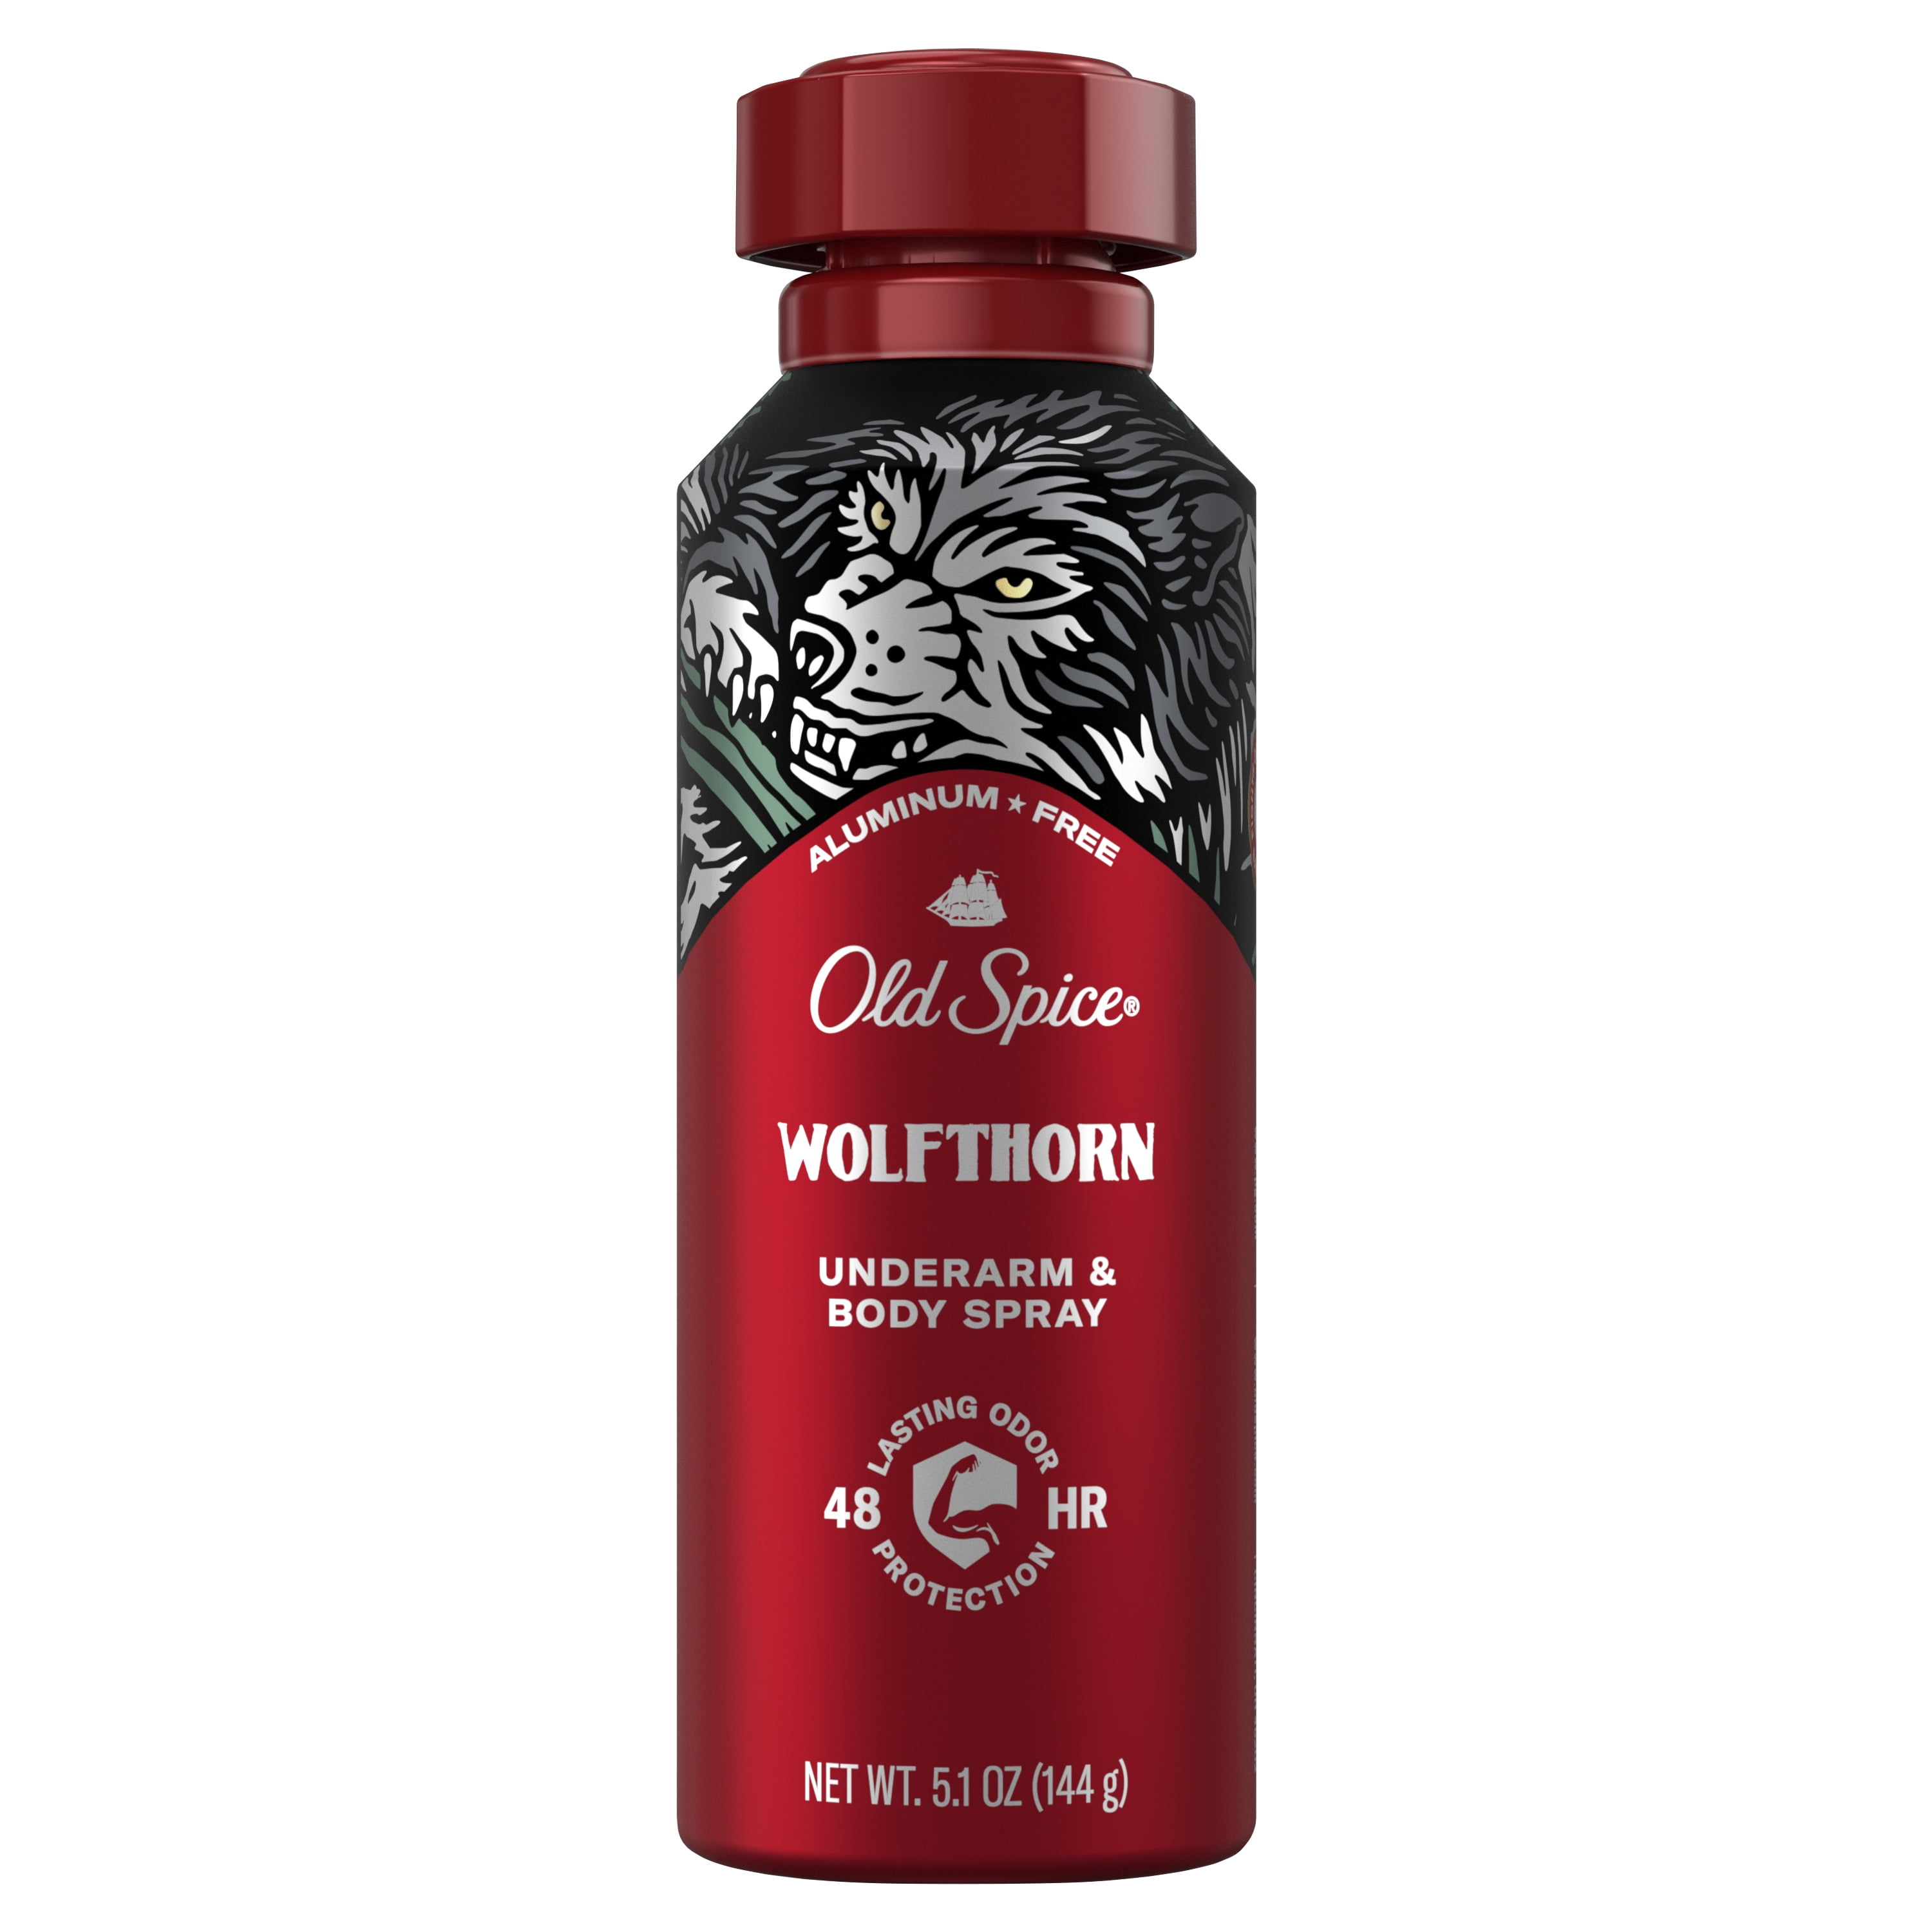 Old Spice Aluminum Free Body Spray for Men, Wolfthorn, 5.1 Oz